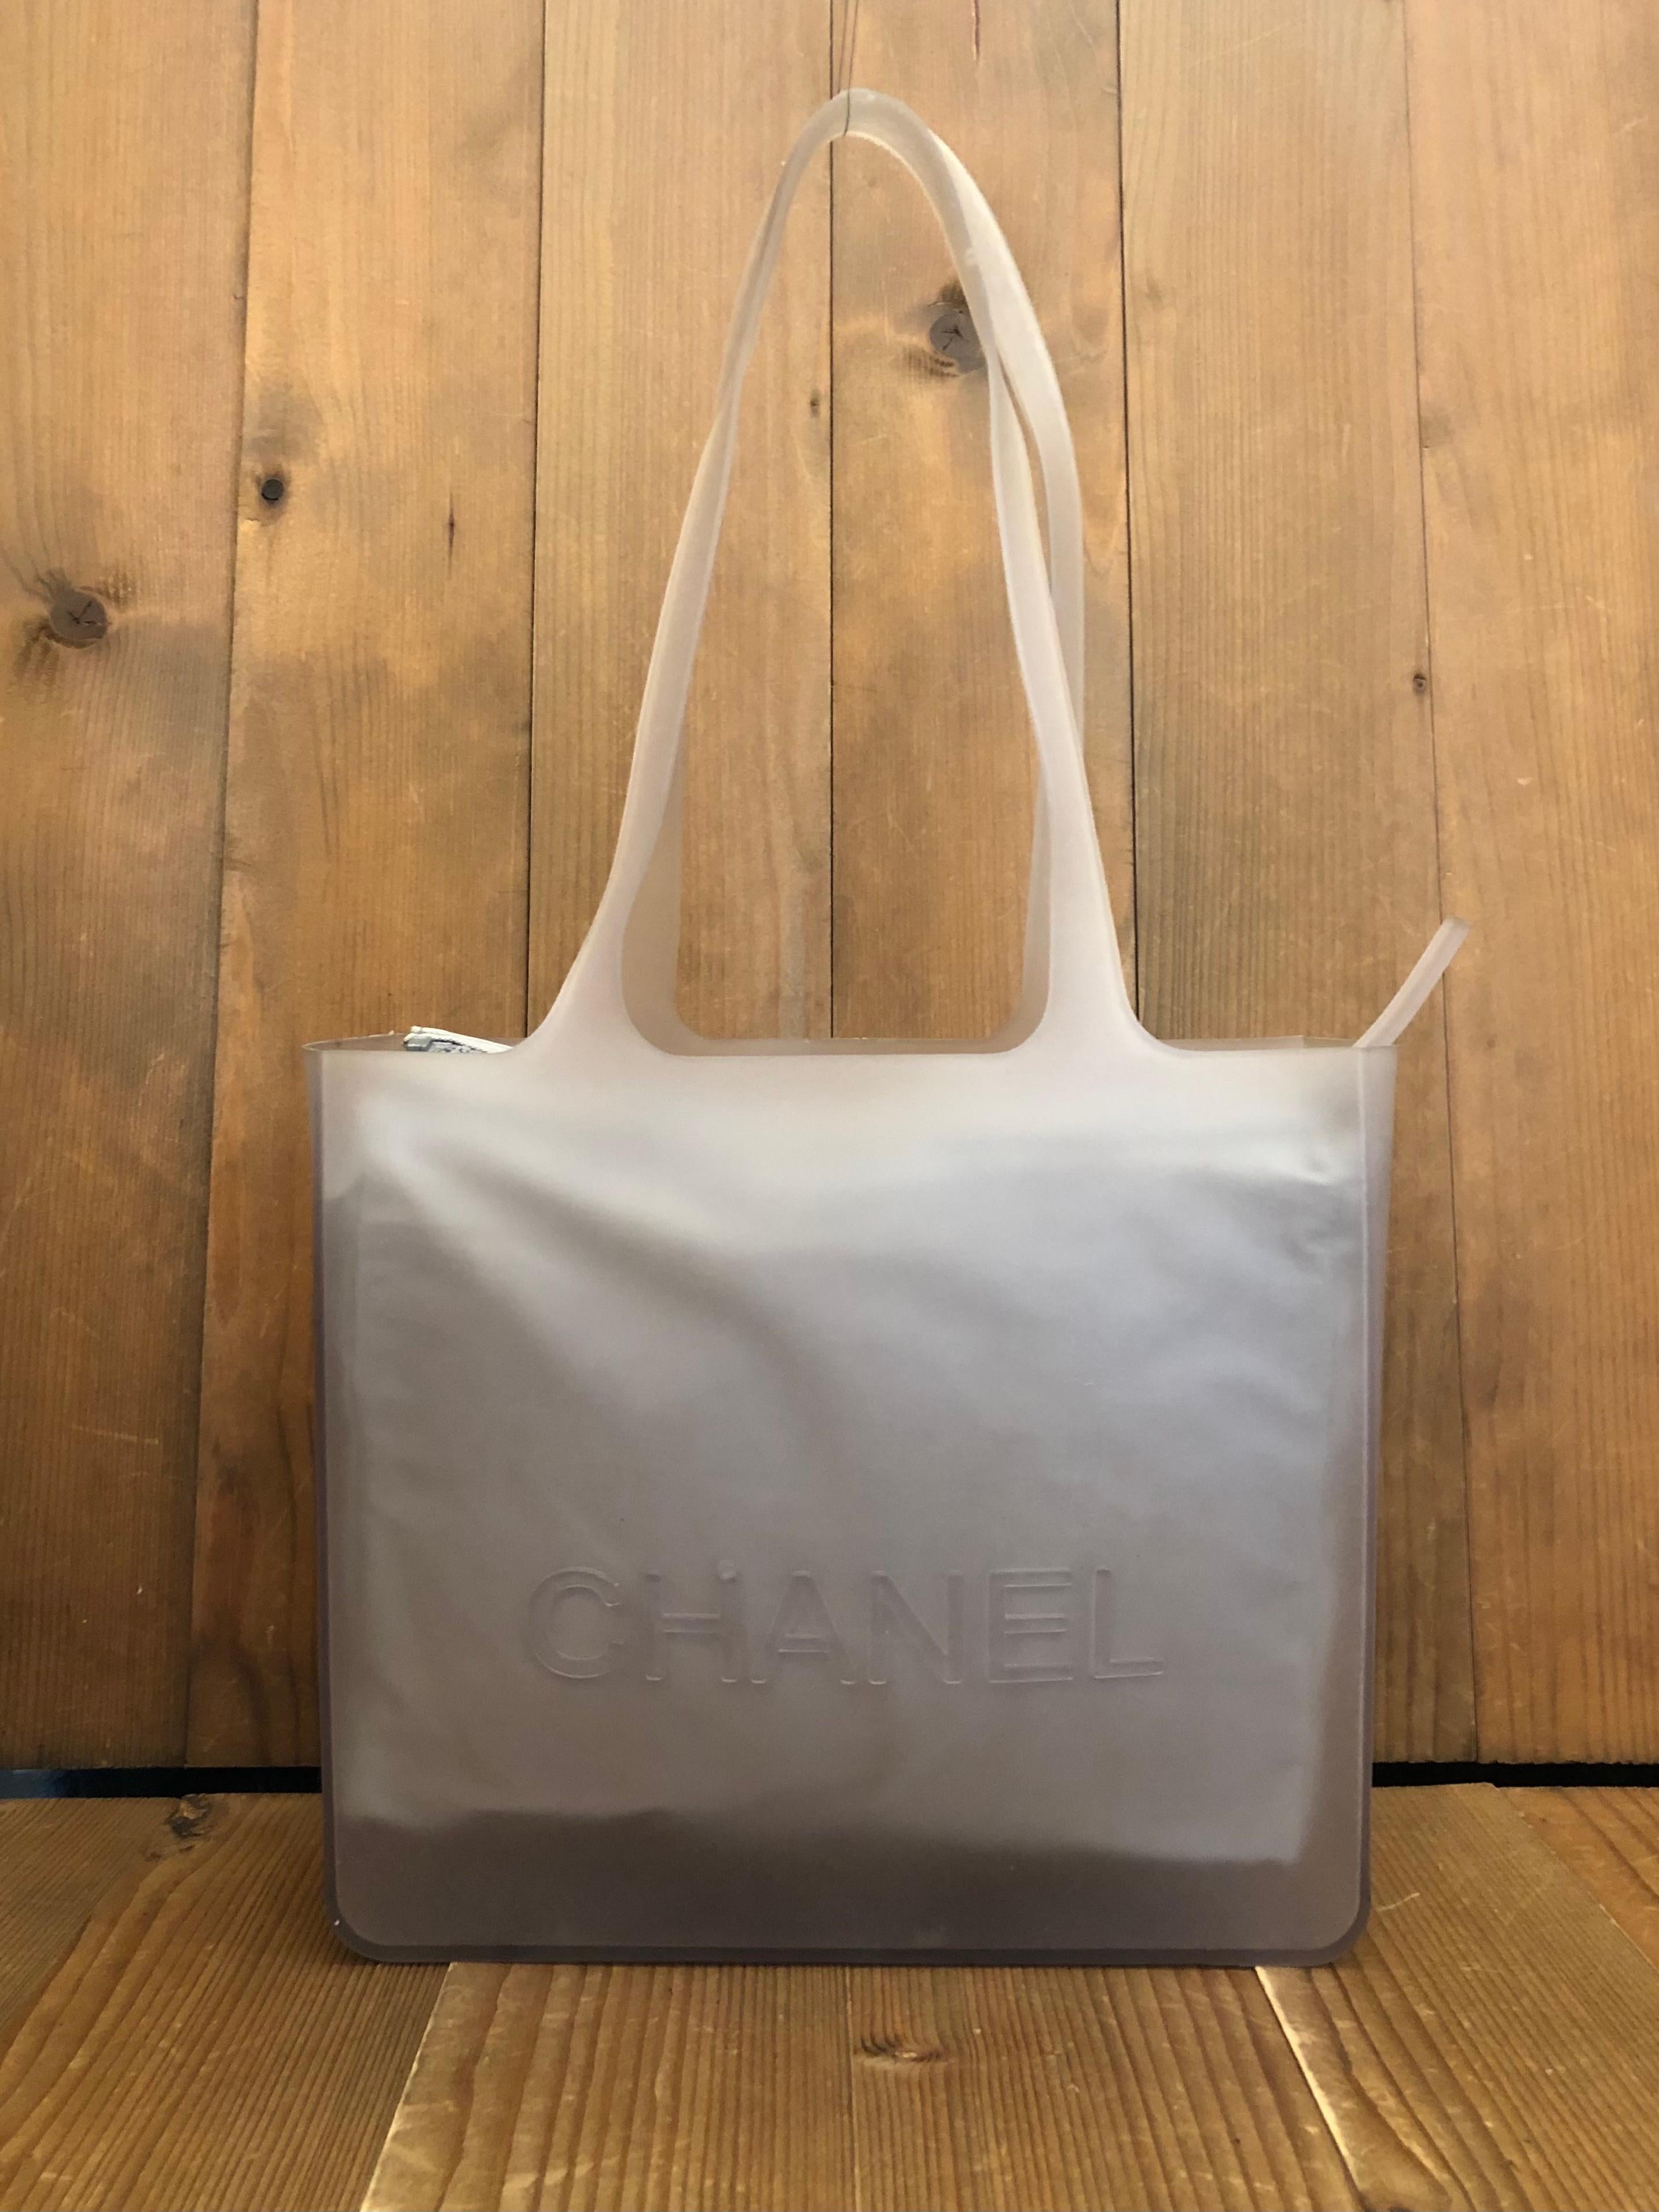 Thai CHANEL translucent tote is crafted of silicone in neutral featuring a fabric zippered pouch in silvery gray. Made in France. Measures approximately 9.75 x 8.5 x 2.75 inches Handle Drop 9 inches. Comes with original zippered pouch insert. Serial